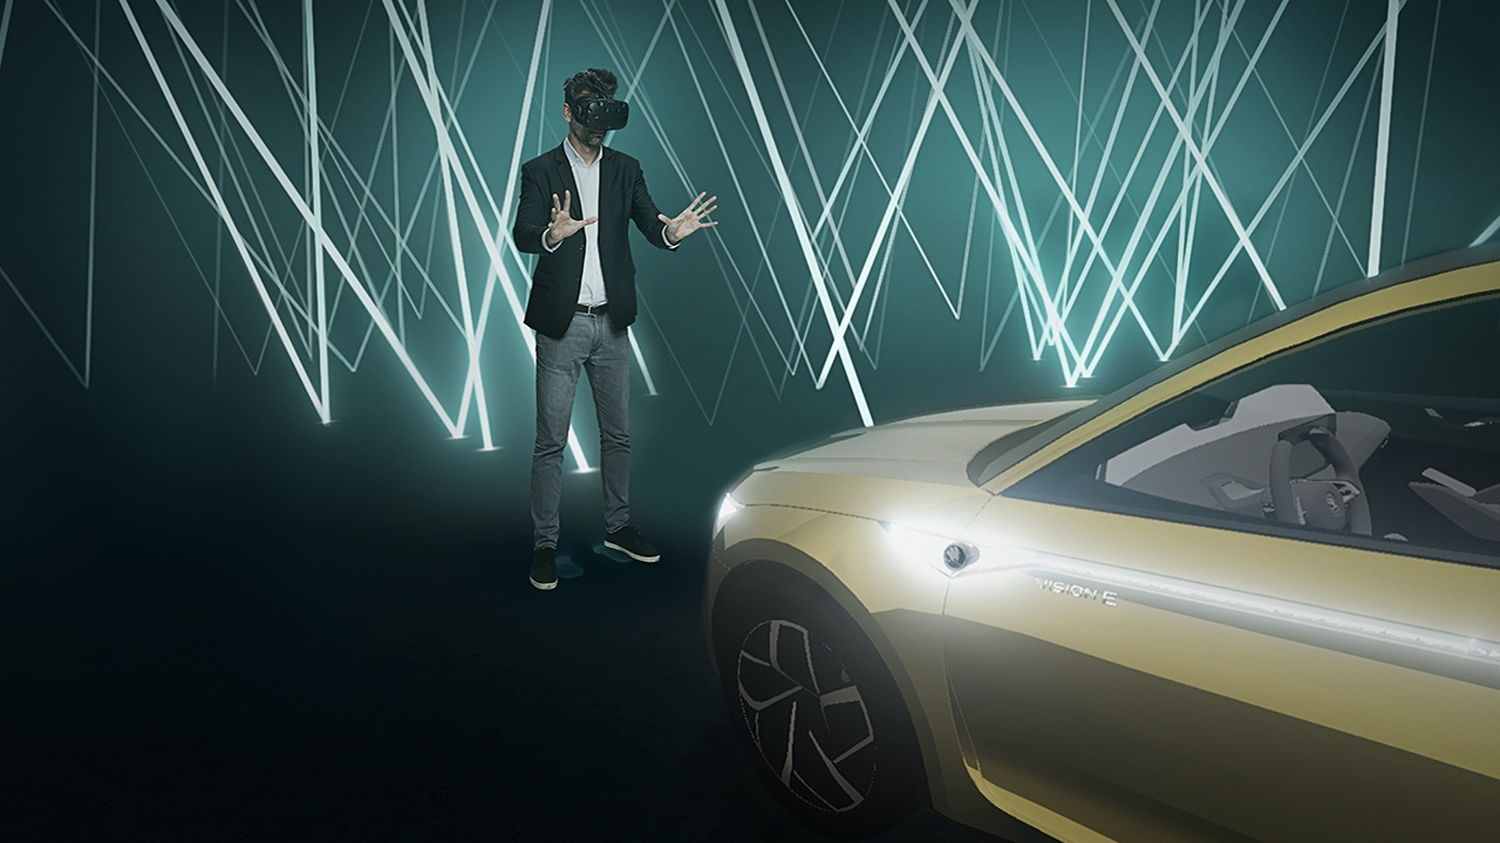 The visitors are immersed in virtual reality at the ŠKODA Museum. Thanks to virtual reality technology, they can explore the ŠKODA VISION E in the digital world and customise the interior of the future-oriented study according to their wishes.